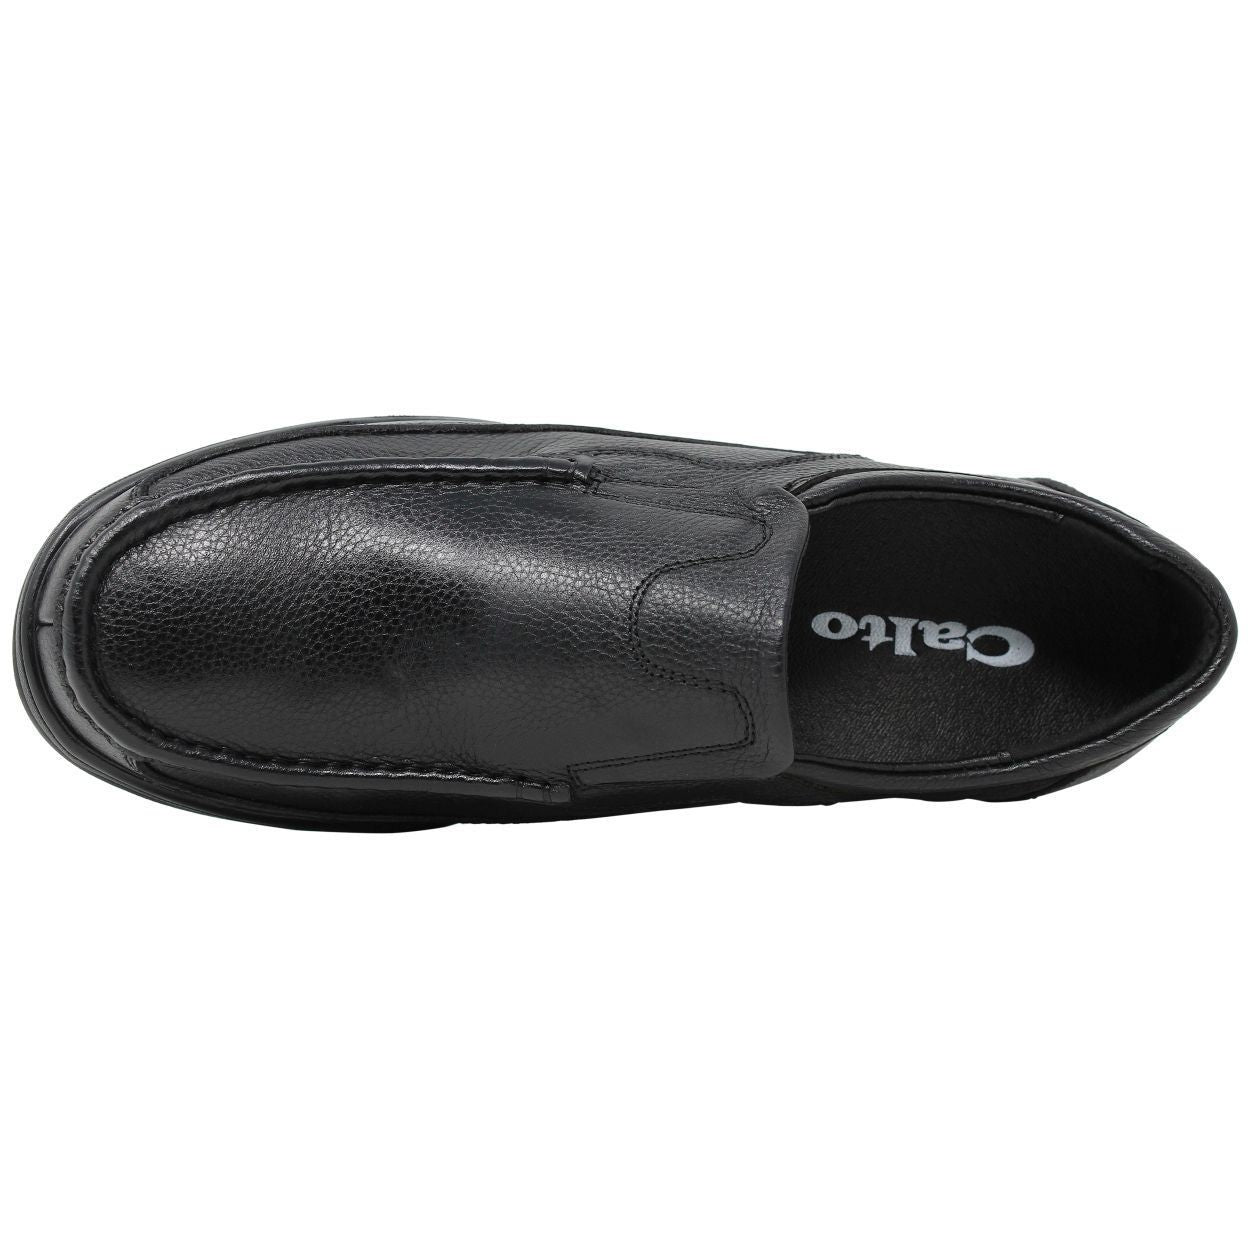 Elevator shoes height increase CALTO - G1825 - 3 Inches Taller (Black) - Lightweight